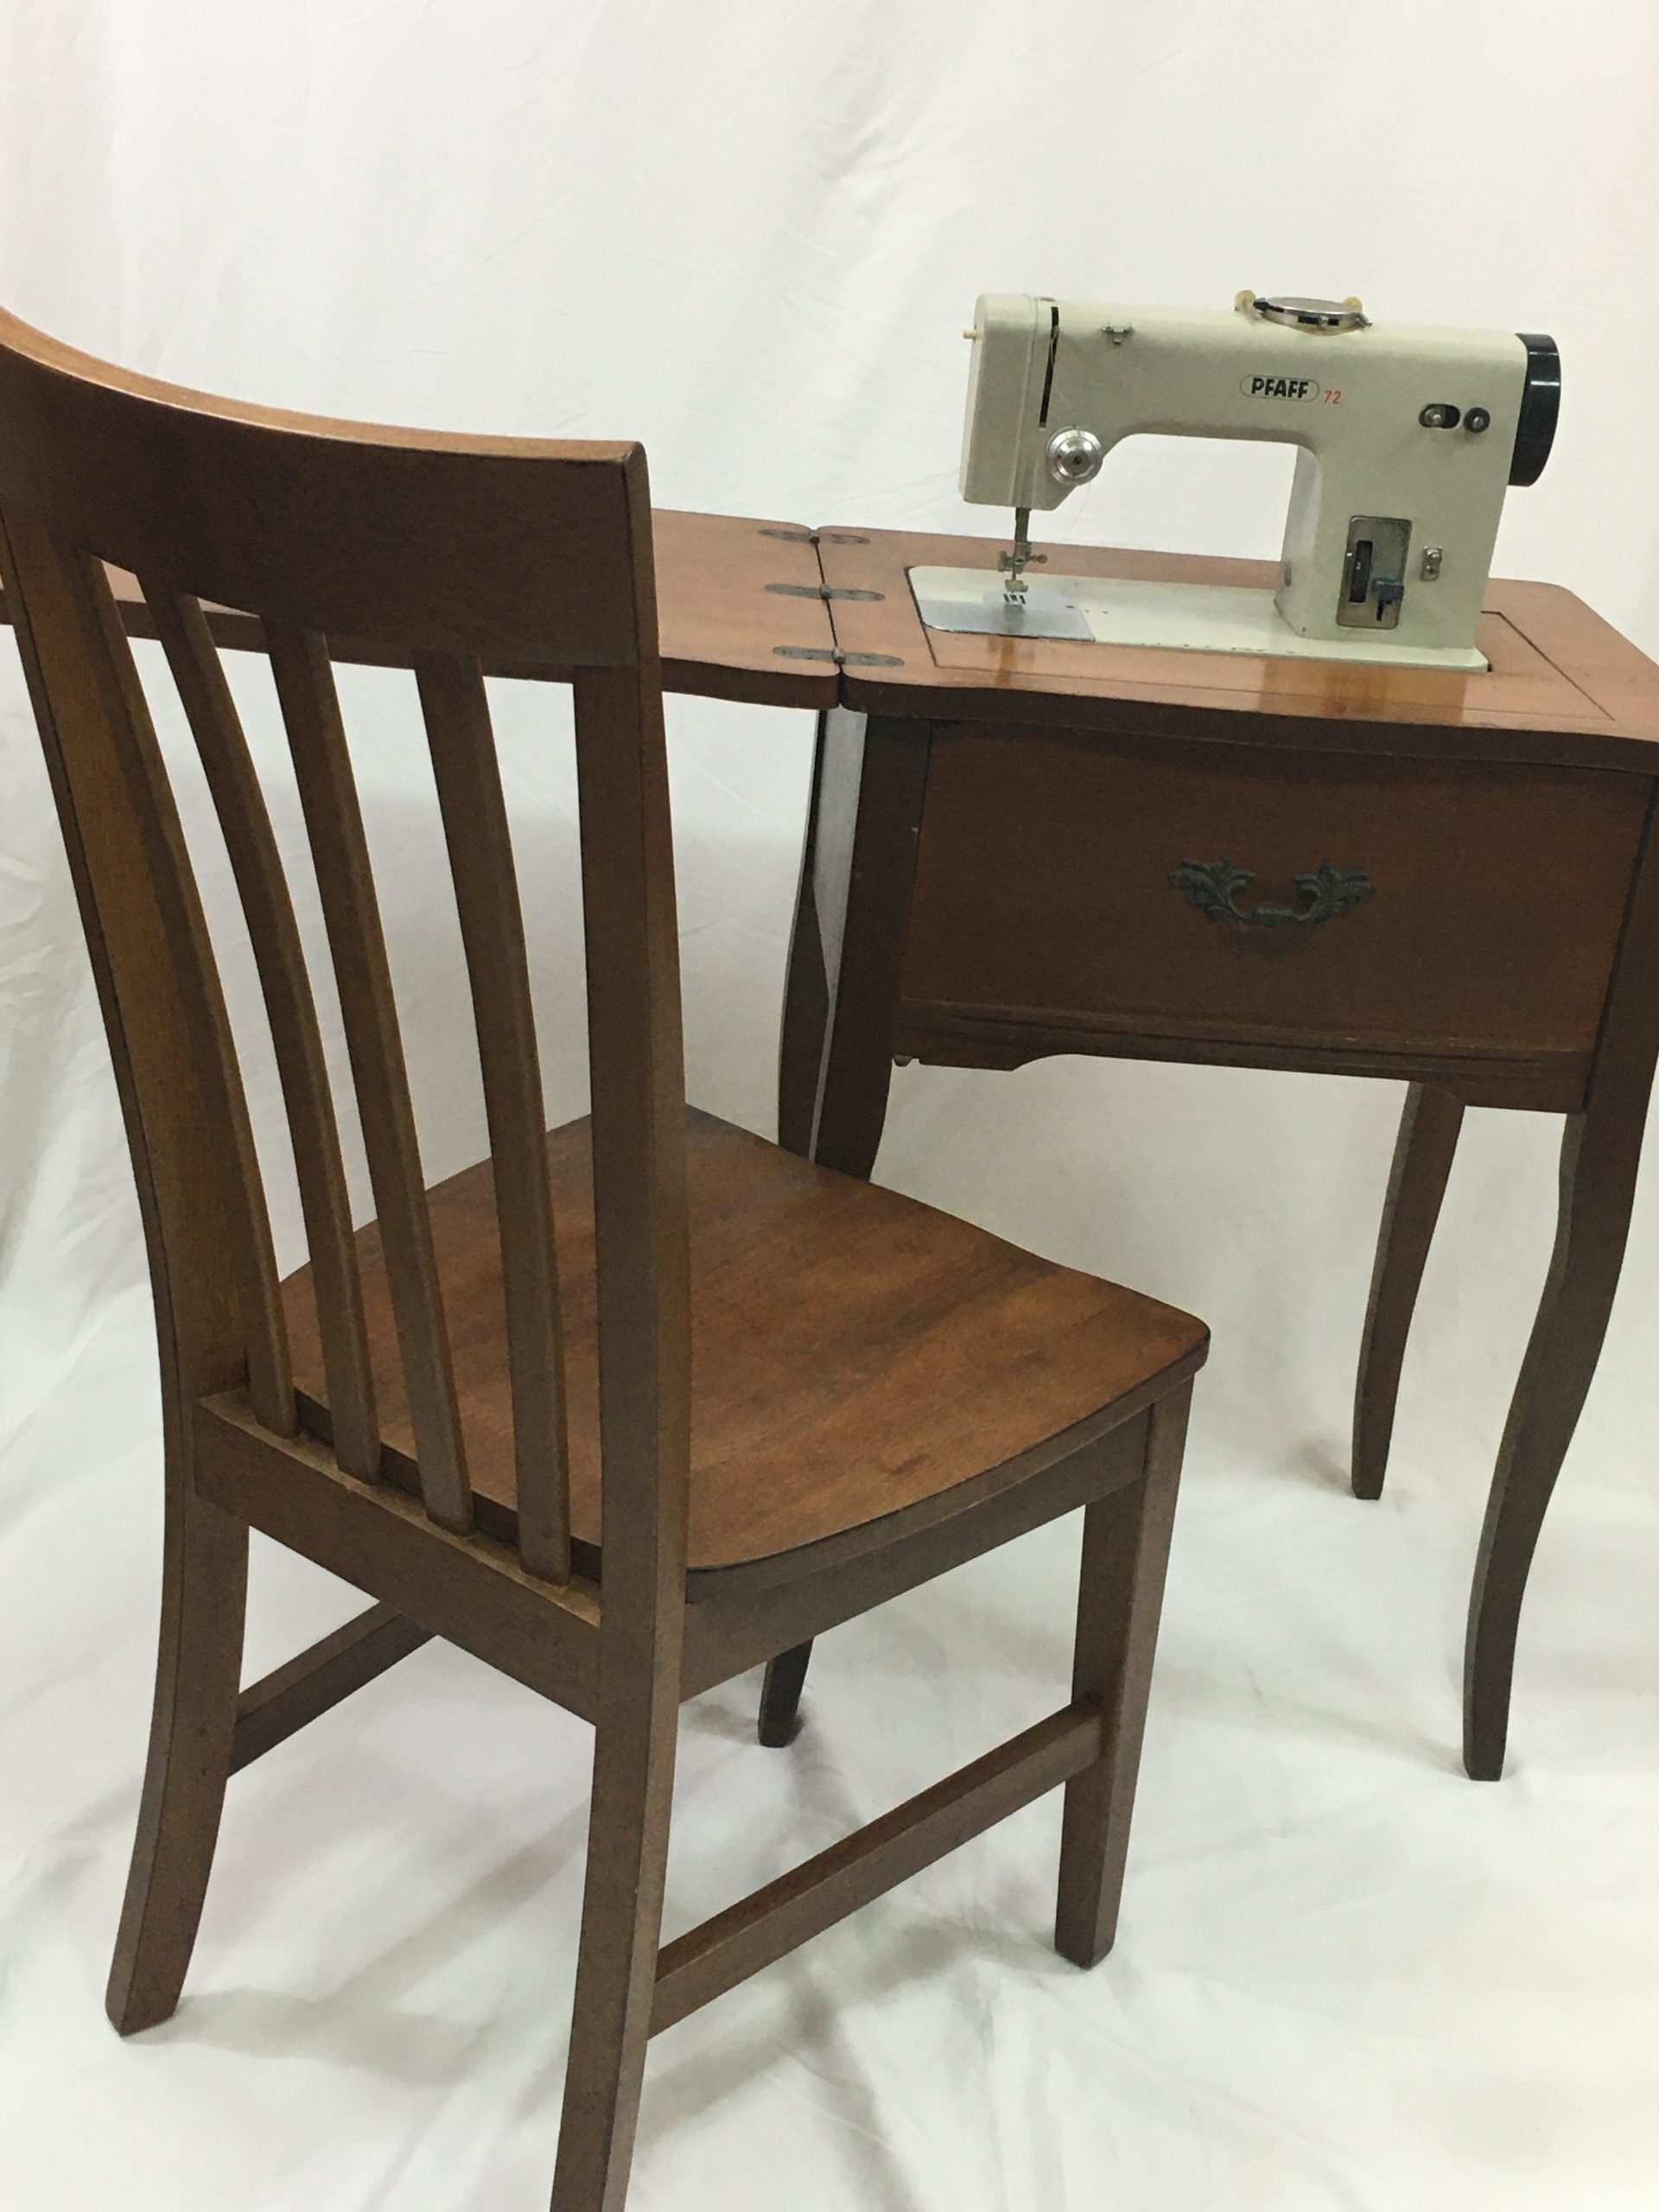 Antique Chair & Sewing Machine Desk – Giving It Away Today